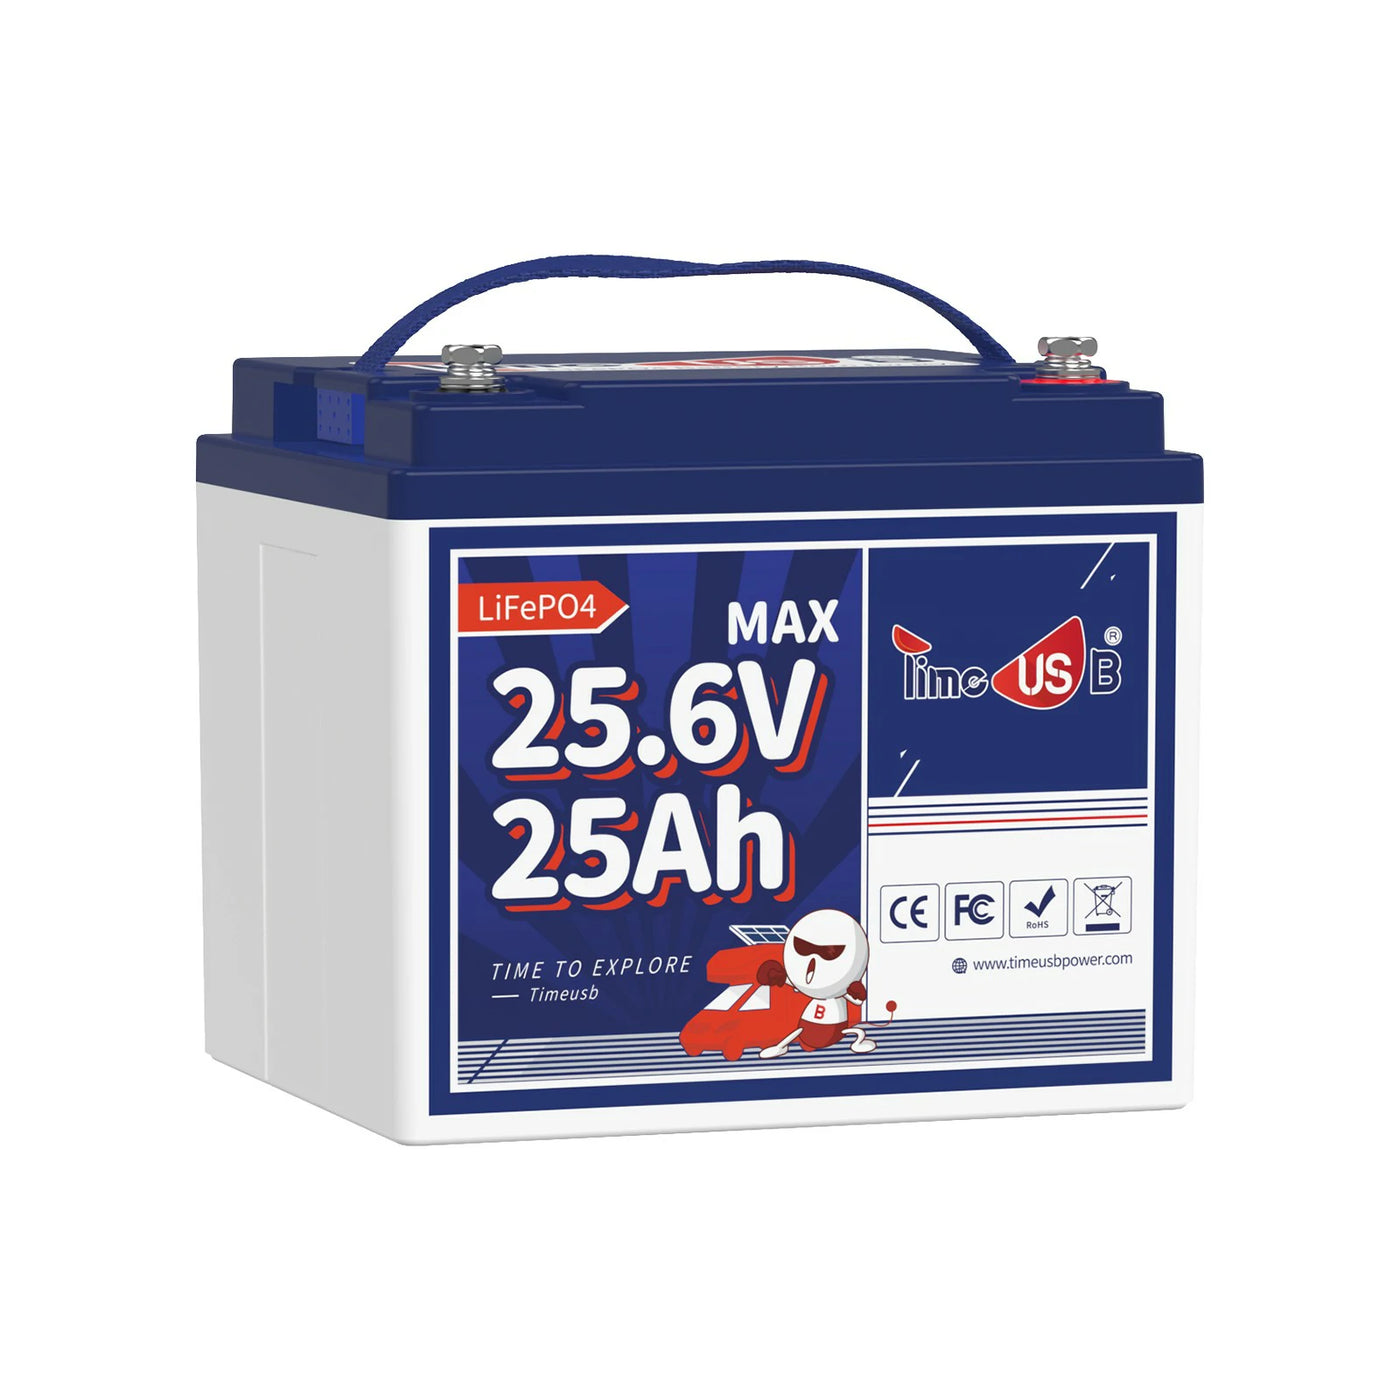 [Final: ＄180.49] Timeusb 24V 25Ah LiFePO4 Battery, 640Wh & 50A BMS